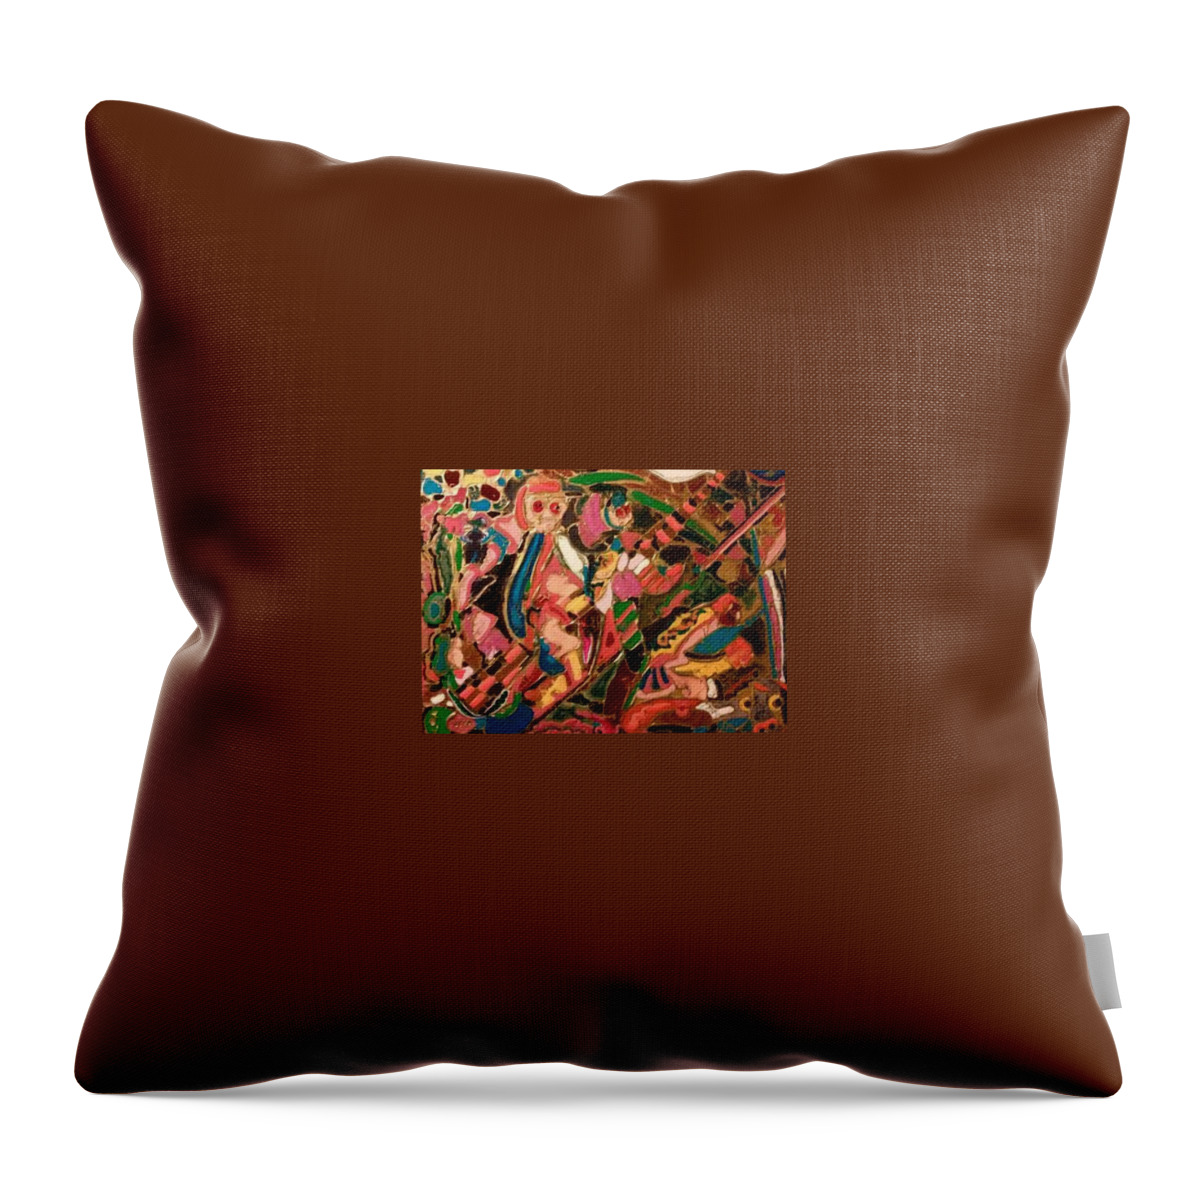 Colorful Art Throw Pillow featuring the painting Sex Violence by Ray Khalife